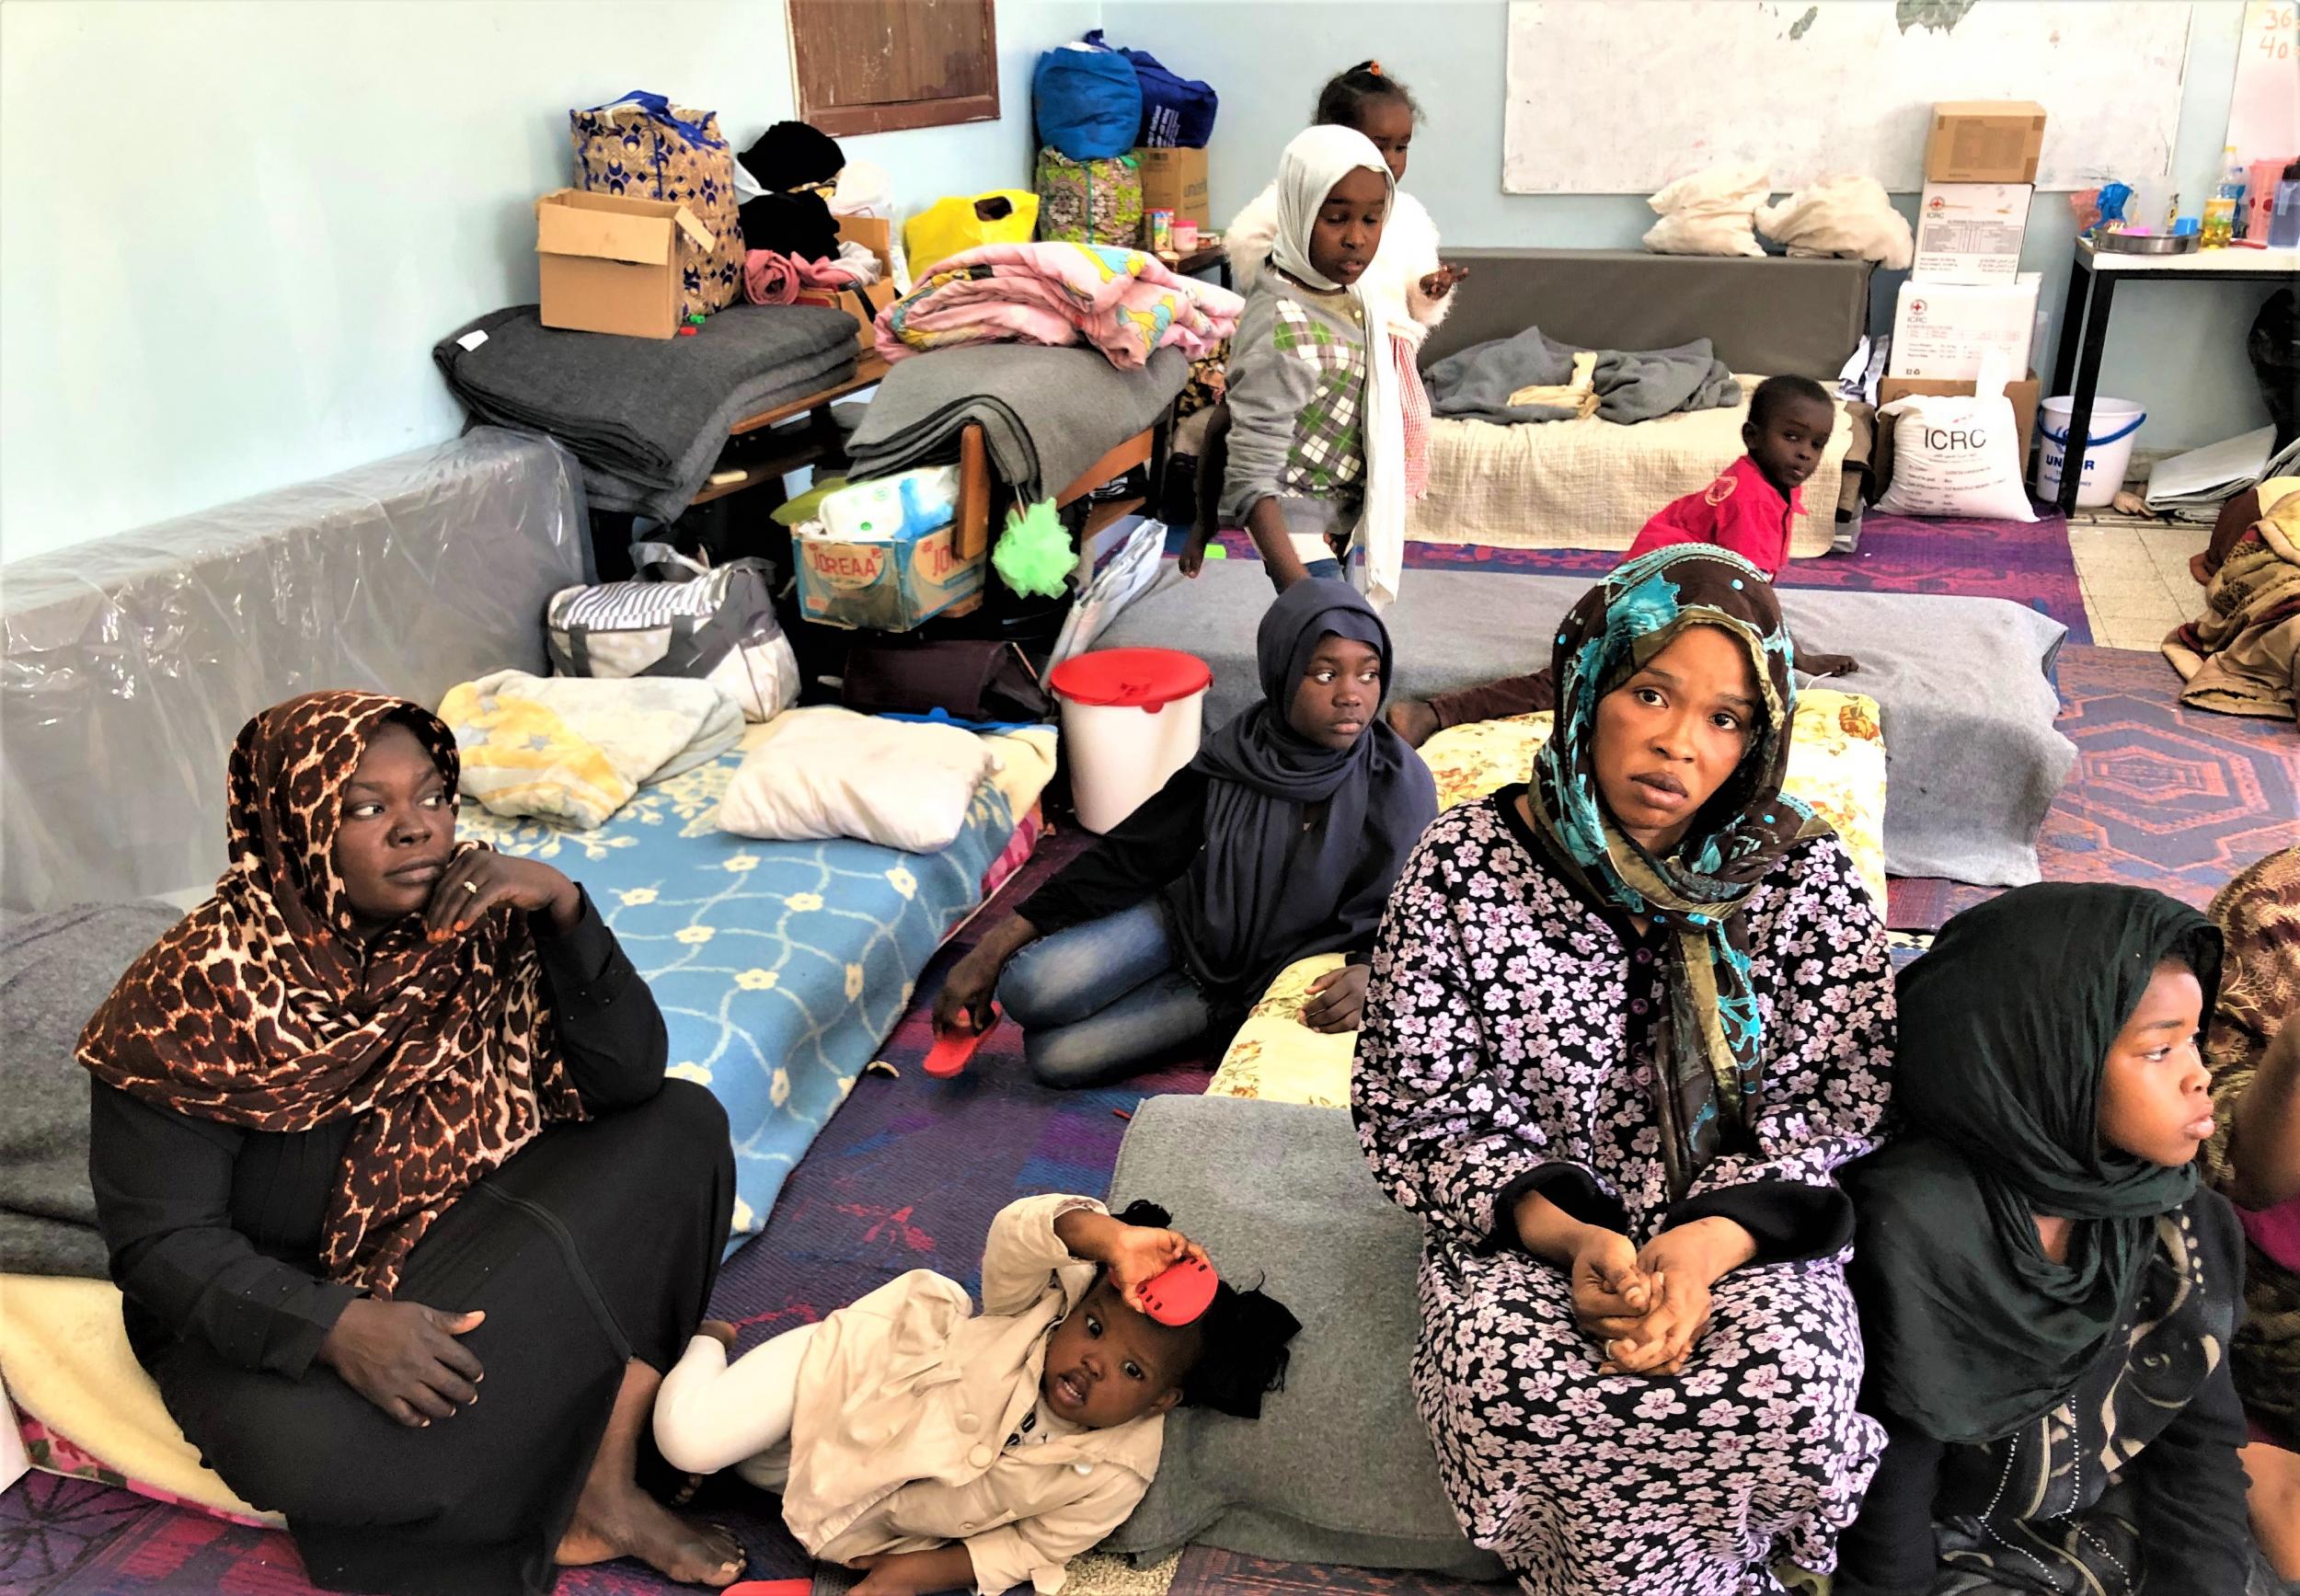 Libya civil war: Thousands of traumatised refugees now trapped in another conflict